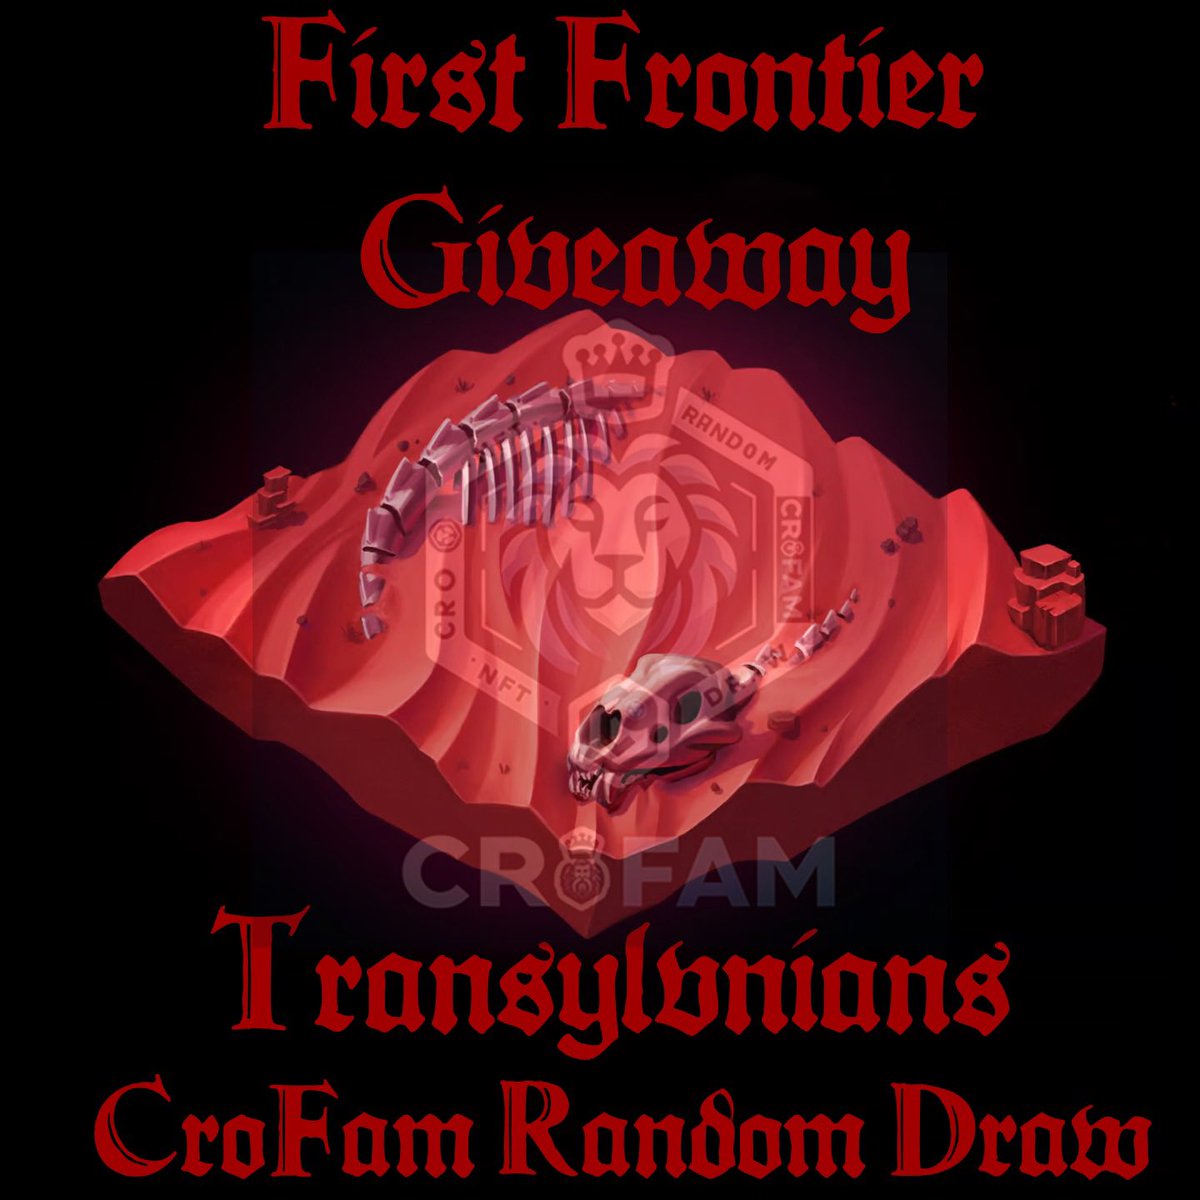 Greetings dear X family ✨
The next Transylvanians CroFam Random Draw giveaway is on Wednesday, April 24th 2024 at 2:00 🕑 pm PST here is the prize 🏆 
#FirstFrontier land from @cryptocomnft 
@foxworthm91 will announce the lucky 🍀 winner.

#Transylvanians #crofam  #randomdraw 🎁